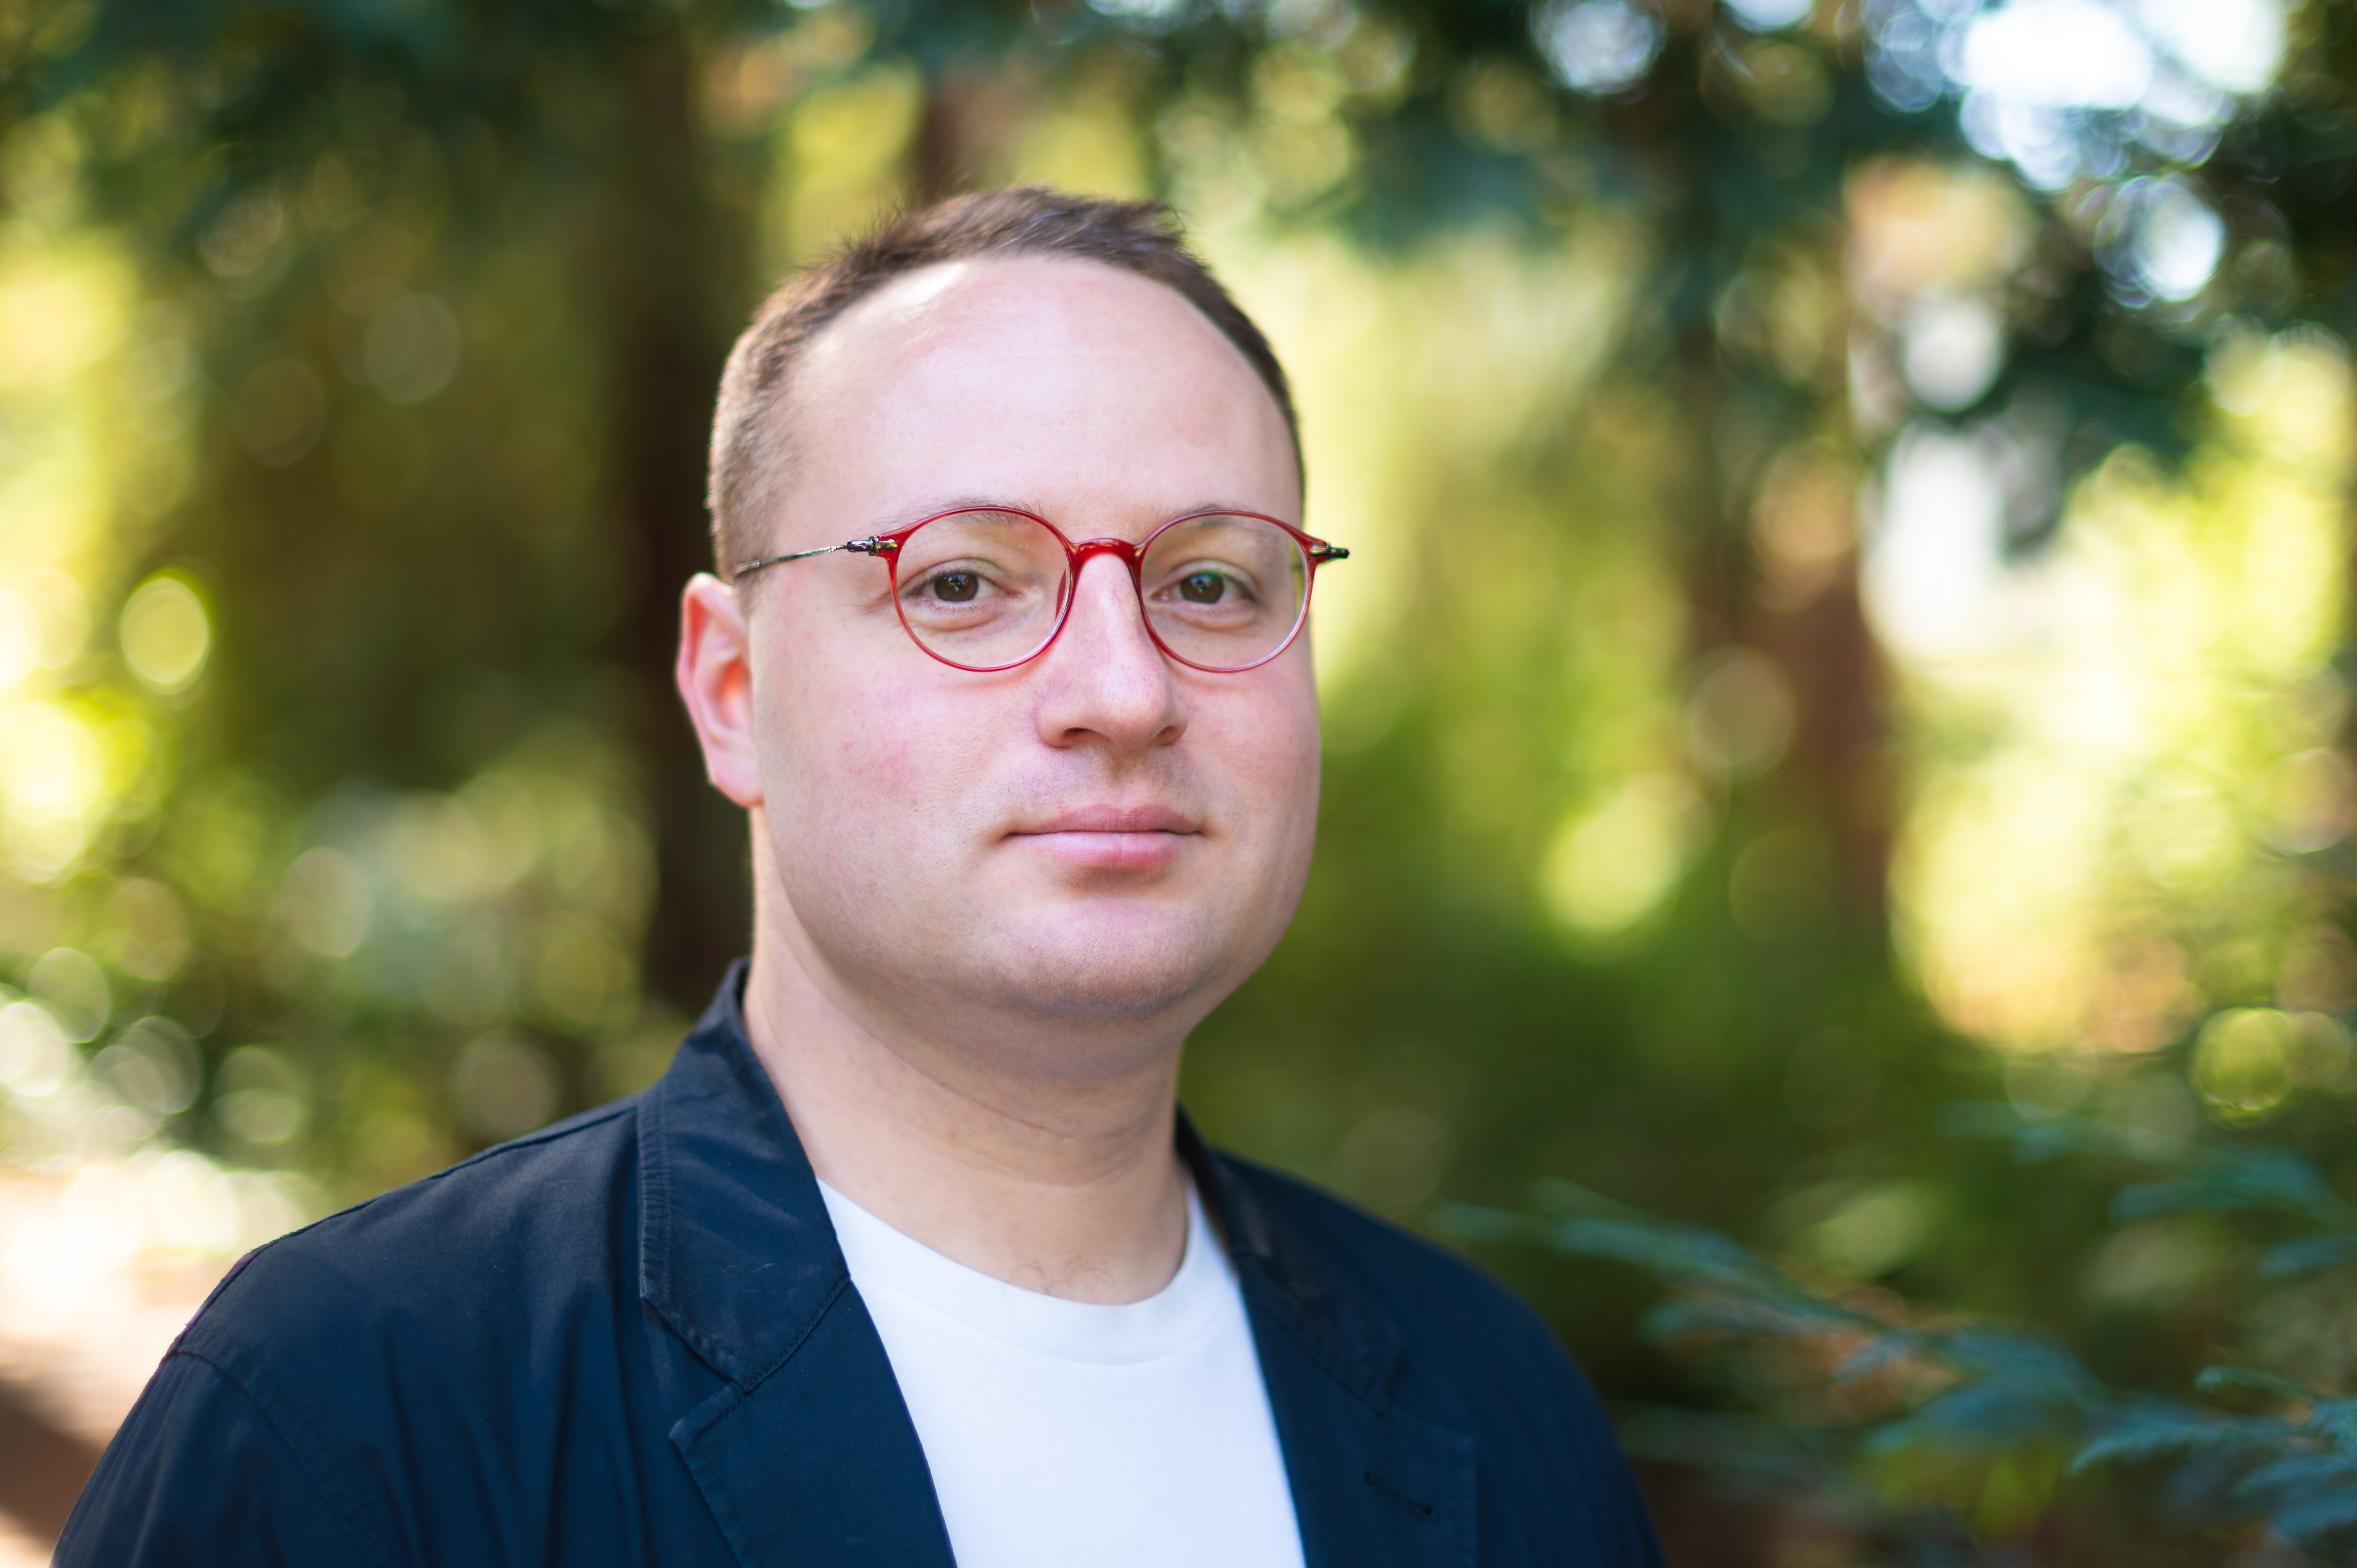 Ilya Matveev, wearing red-rimmed eyeglasses, faces the camera for a shoulders-up portrait against a background of outdoor greenery.